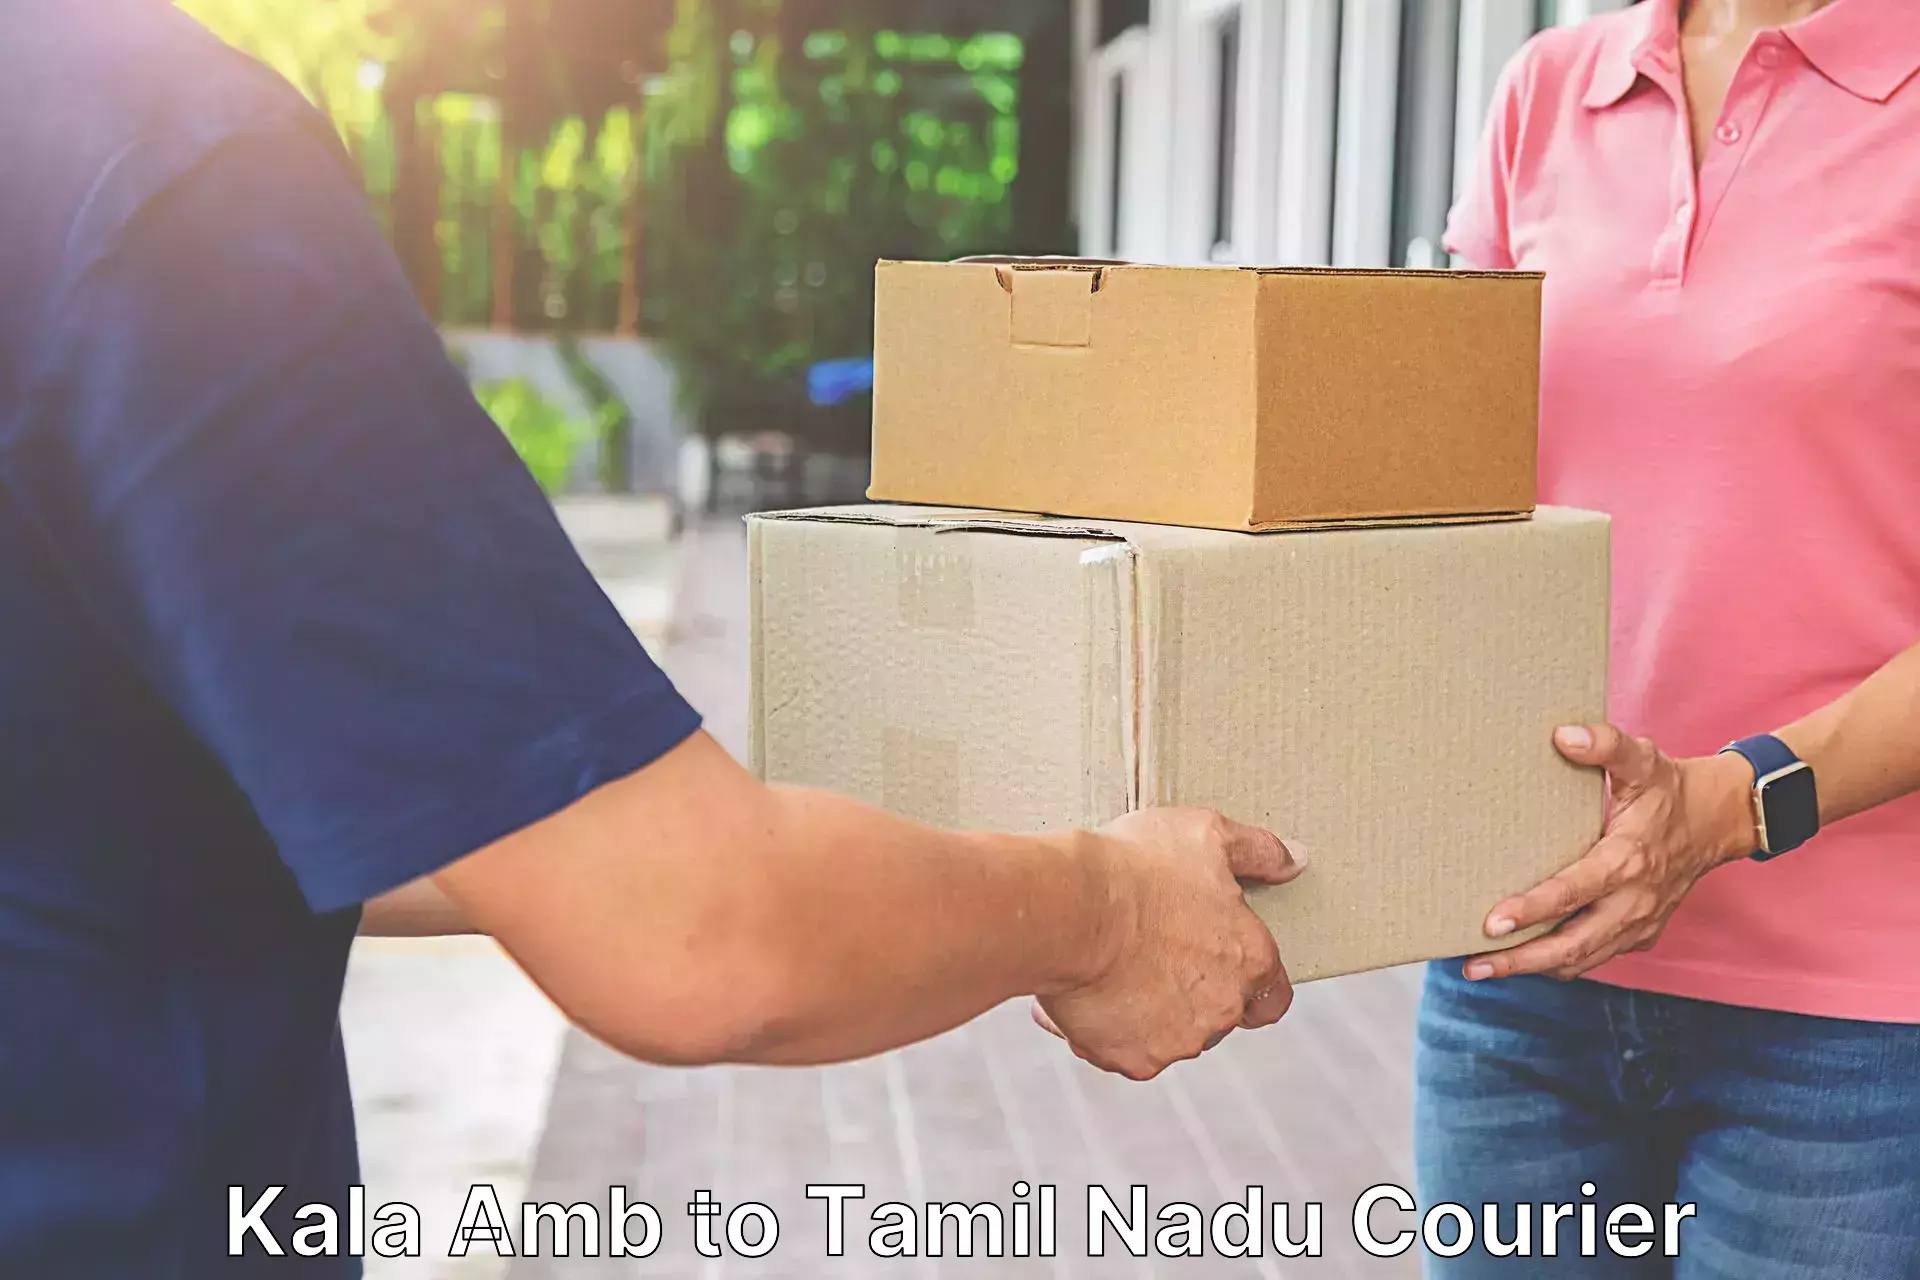 Residential courier service Kala Amb to Sriperumbudur